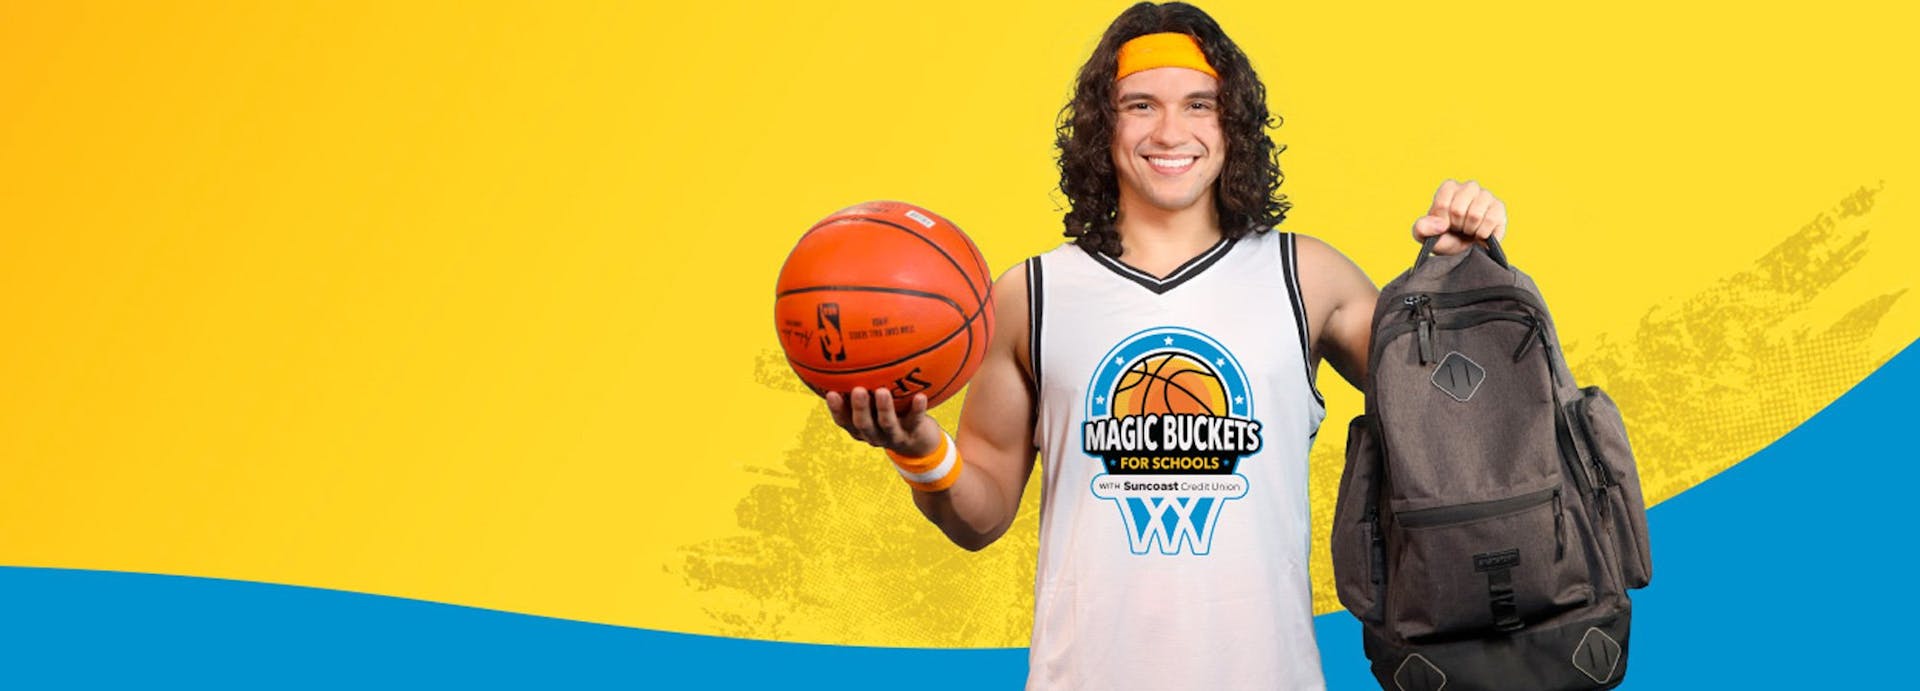 spencer the suncoast influencer holding a basketball and wearing a jersey